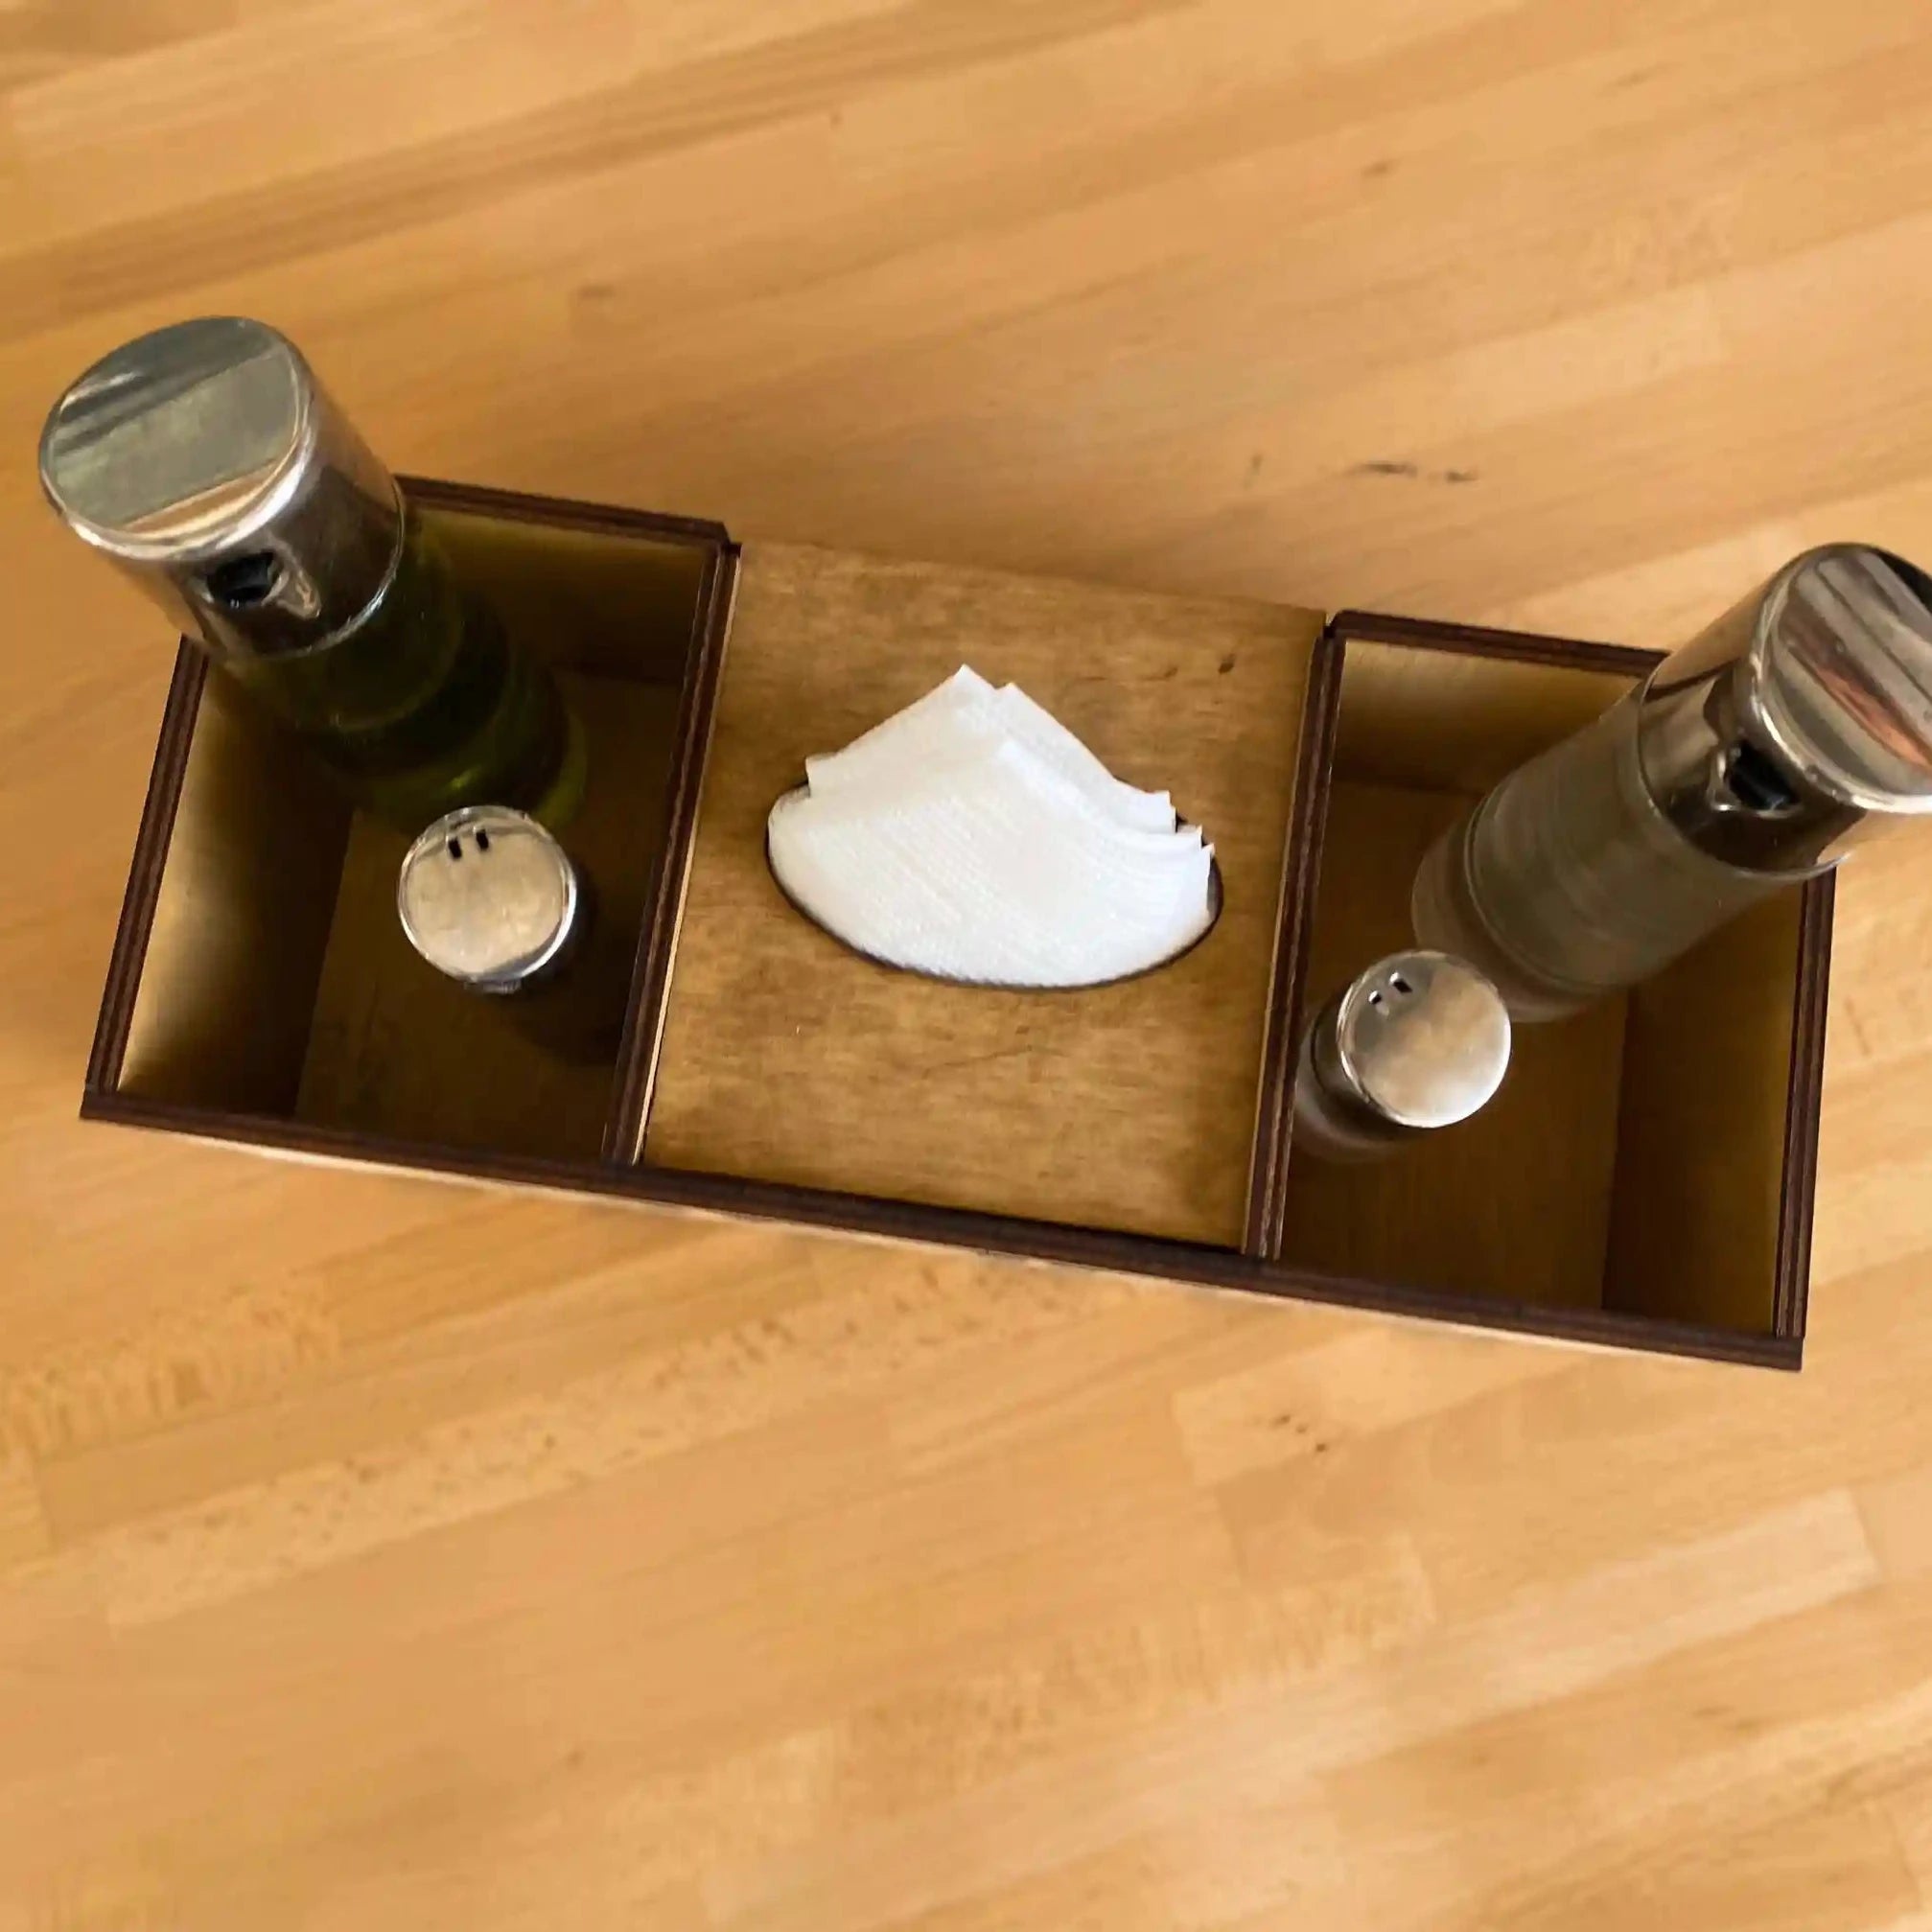 Wooden Holder For Condiments and Napkins